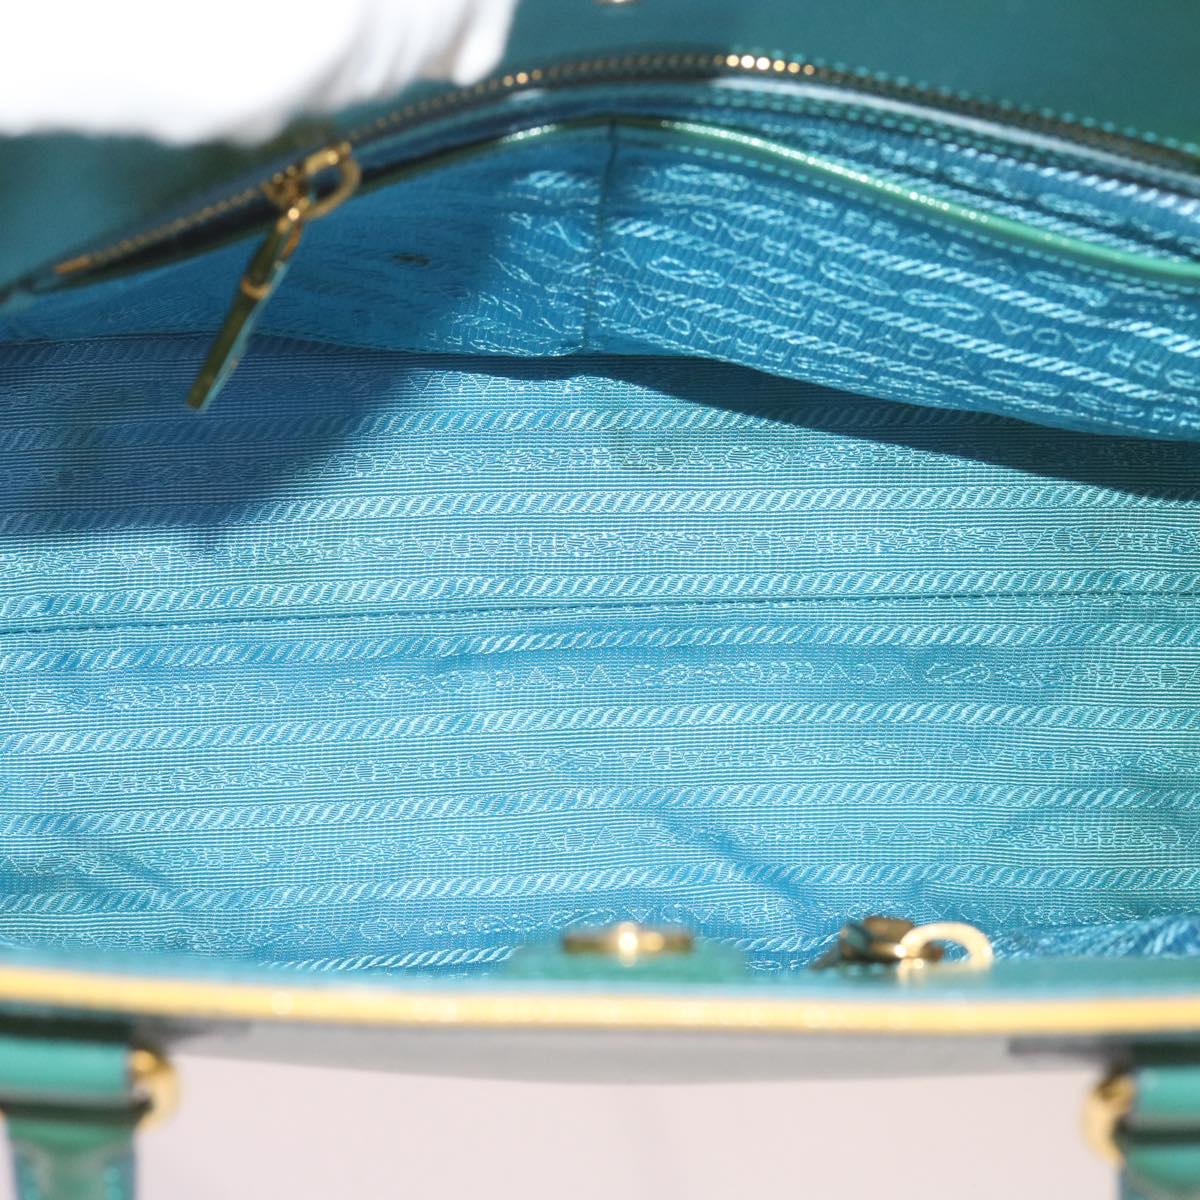 PRADA Hand Bag Leather 2way Turquoise Blue Auth bs12369